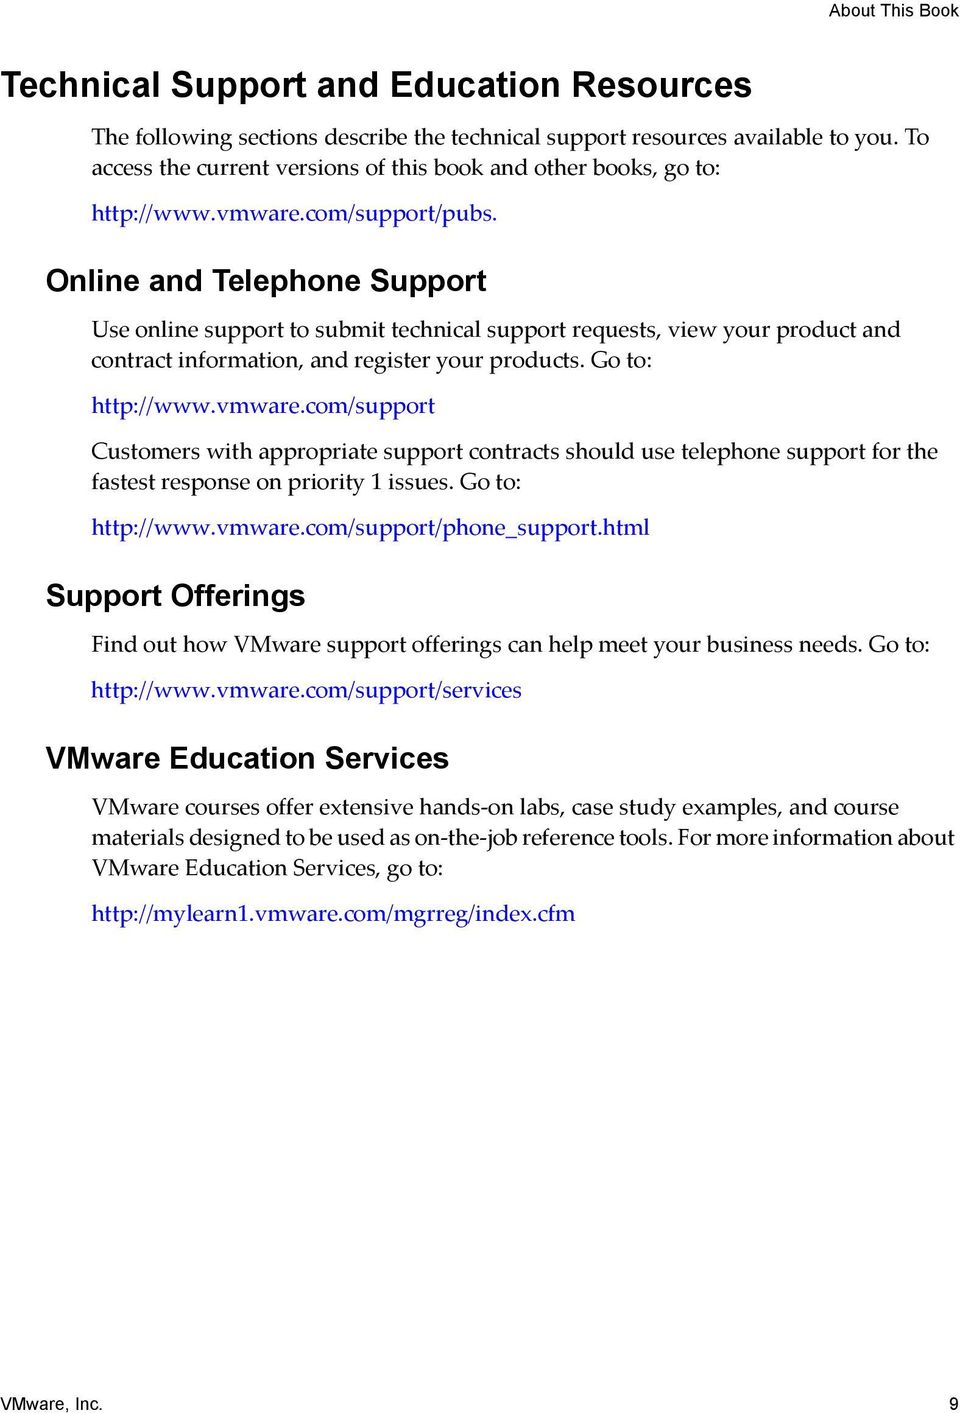 Online and Telephone Support Use online support to submit technical support requests, view your product and contract information, and register your products. Go to: http://www.vmware.